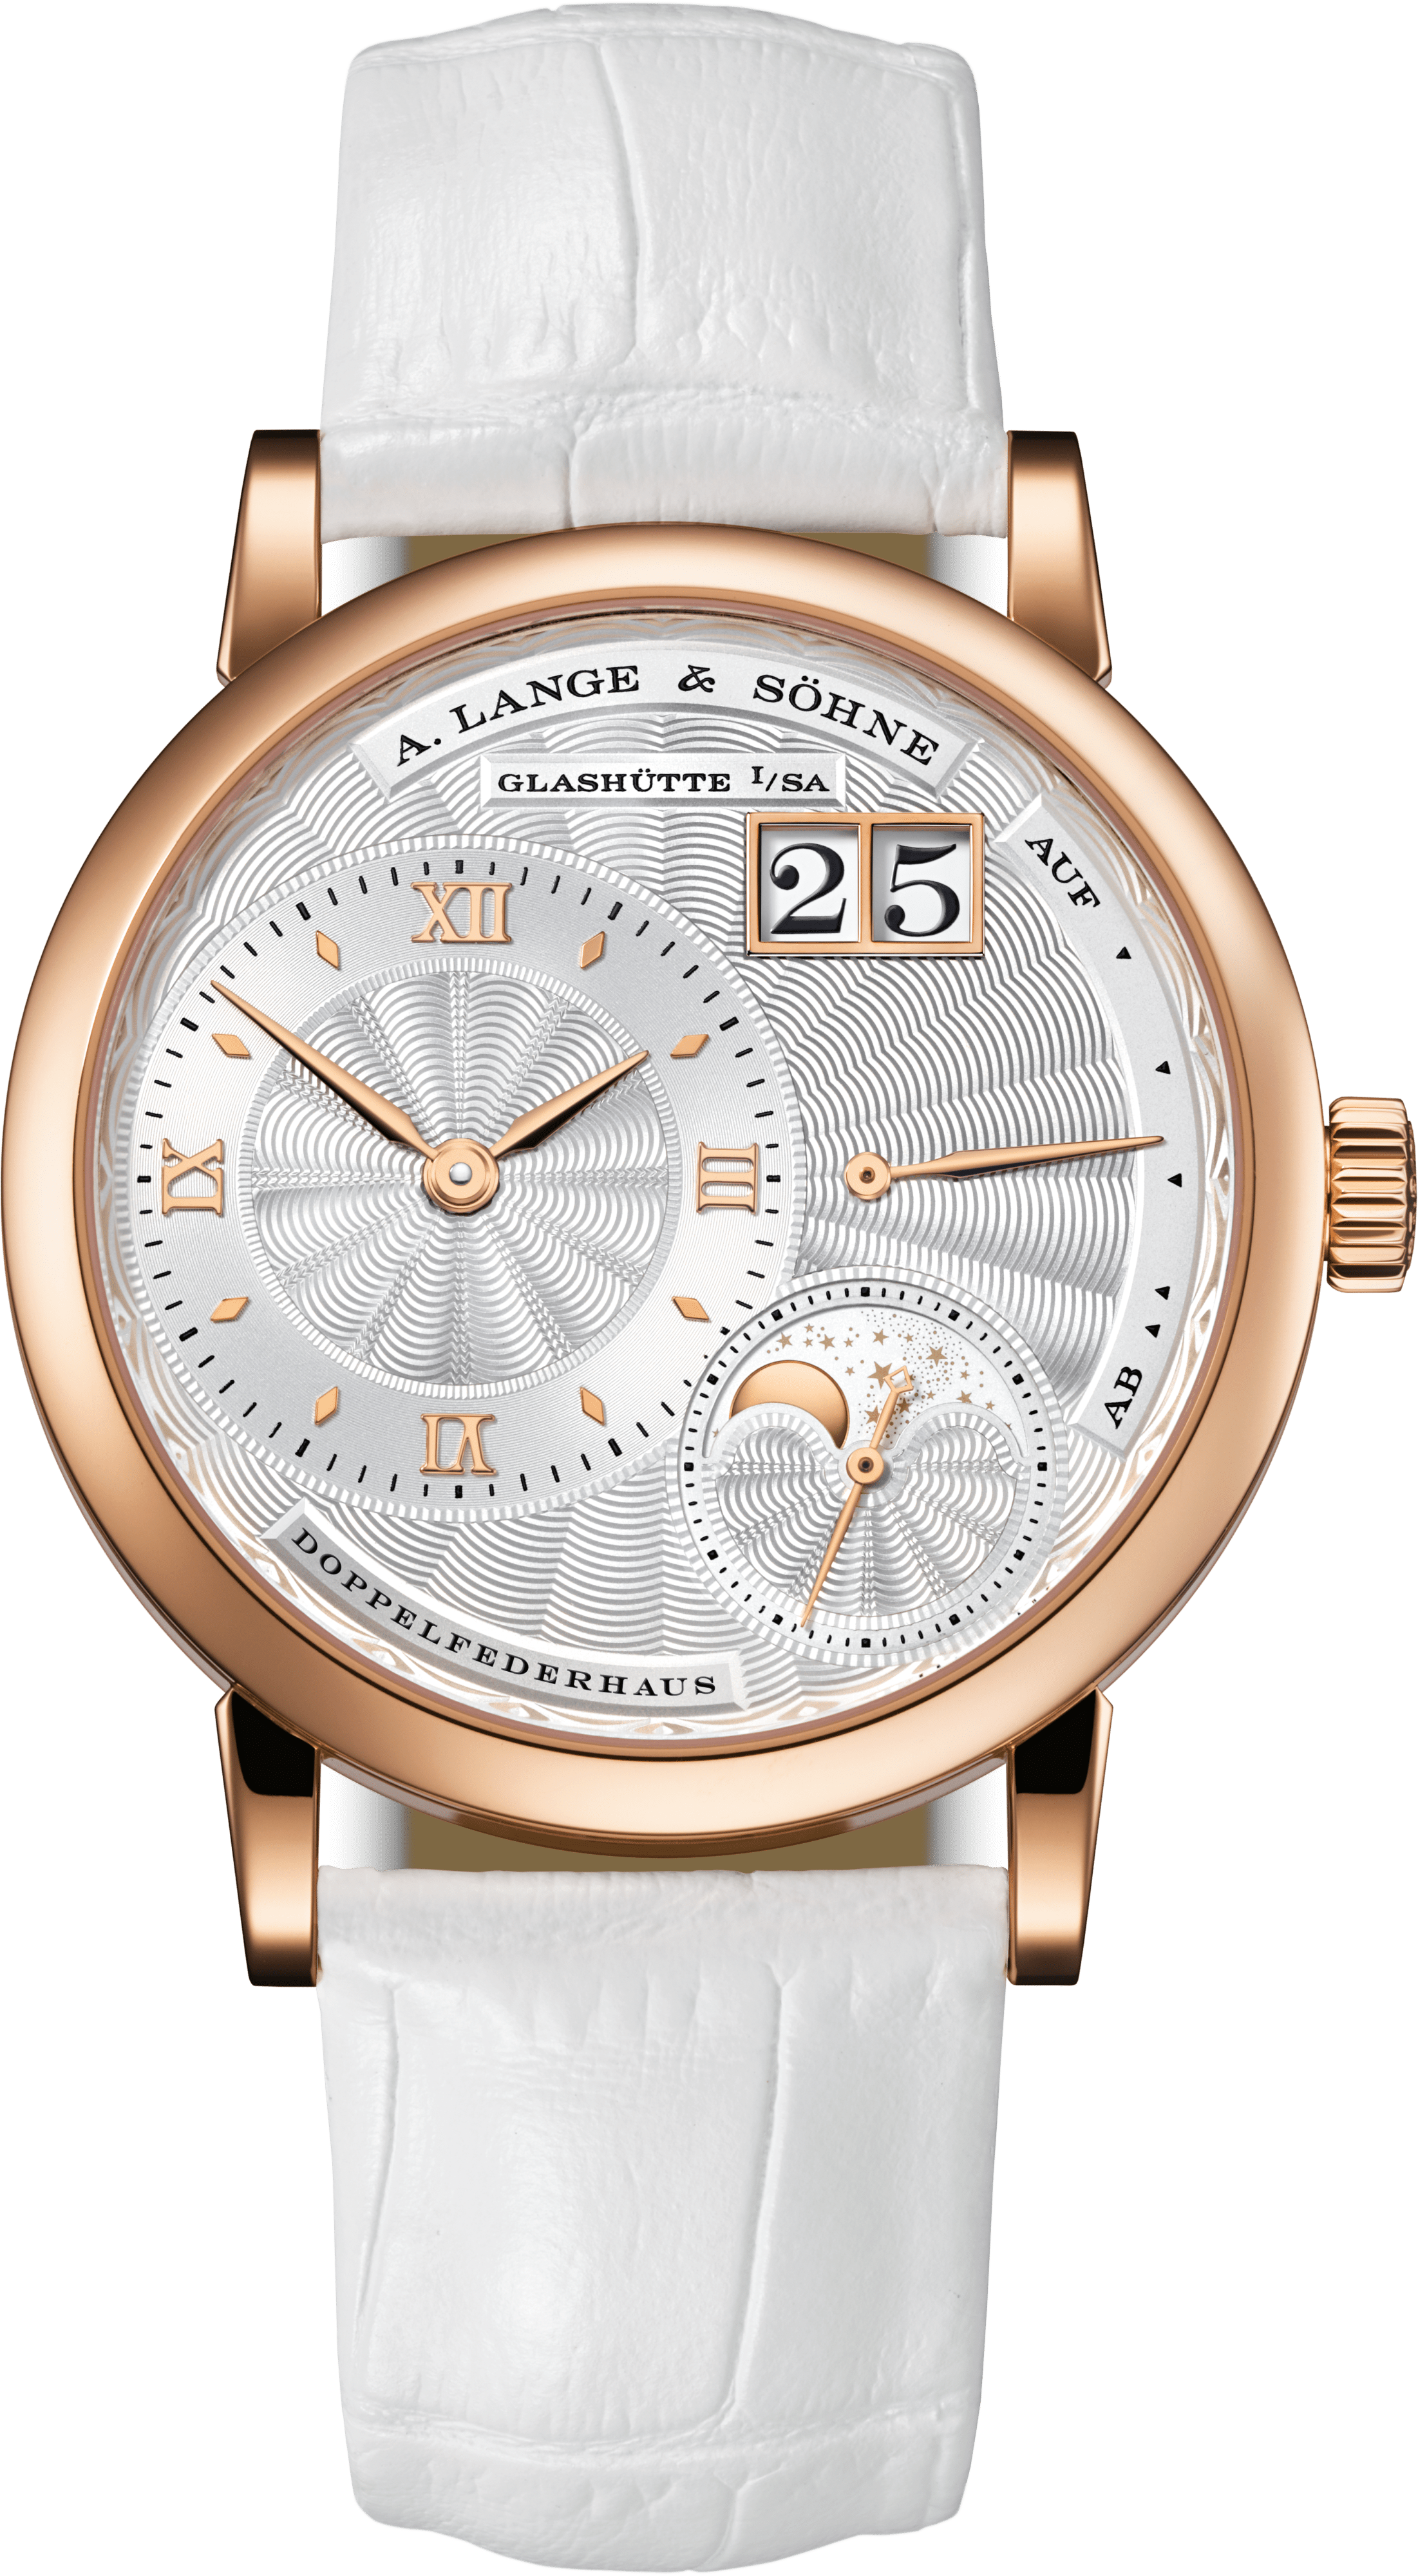 Where Can I Buy Fake Watches In New York